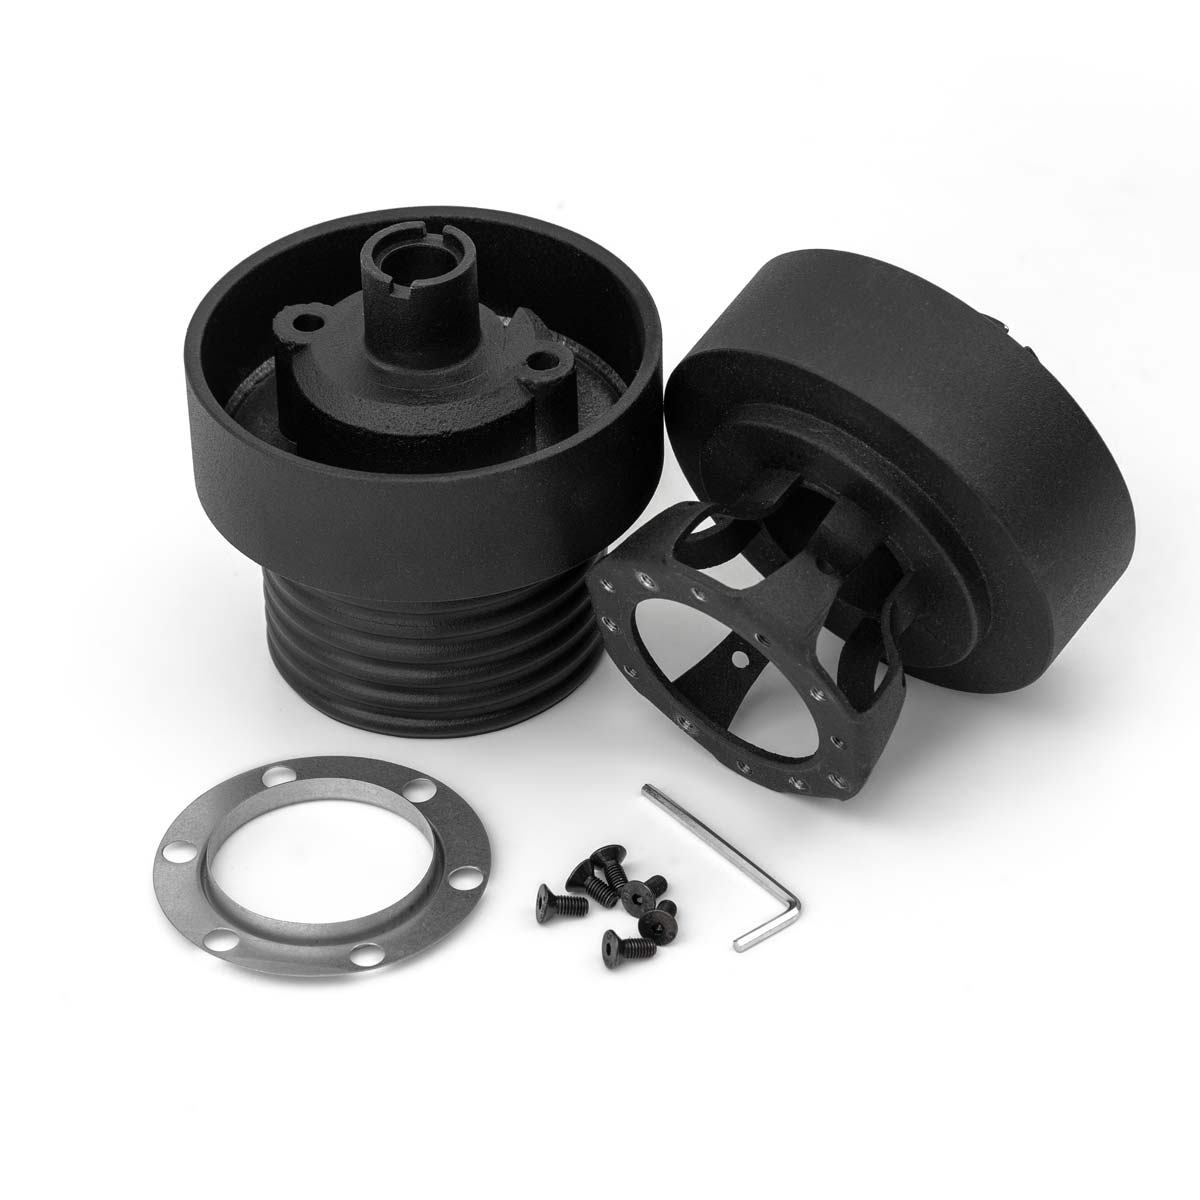 LUISI steering wheel hub Nissan Terrano up to 1992 (TÜV-compliant deformable / 6x74mm 6x70mm)